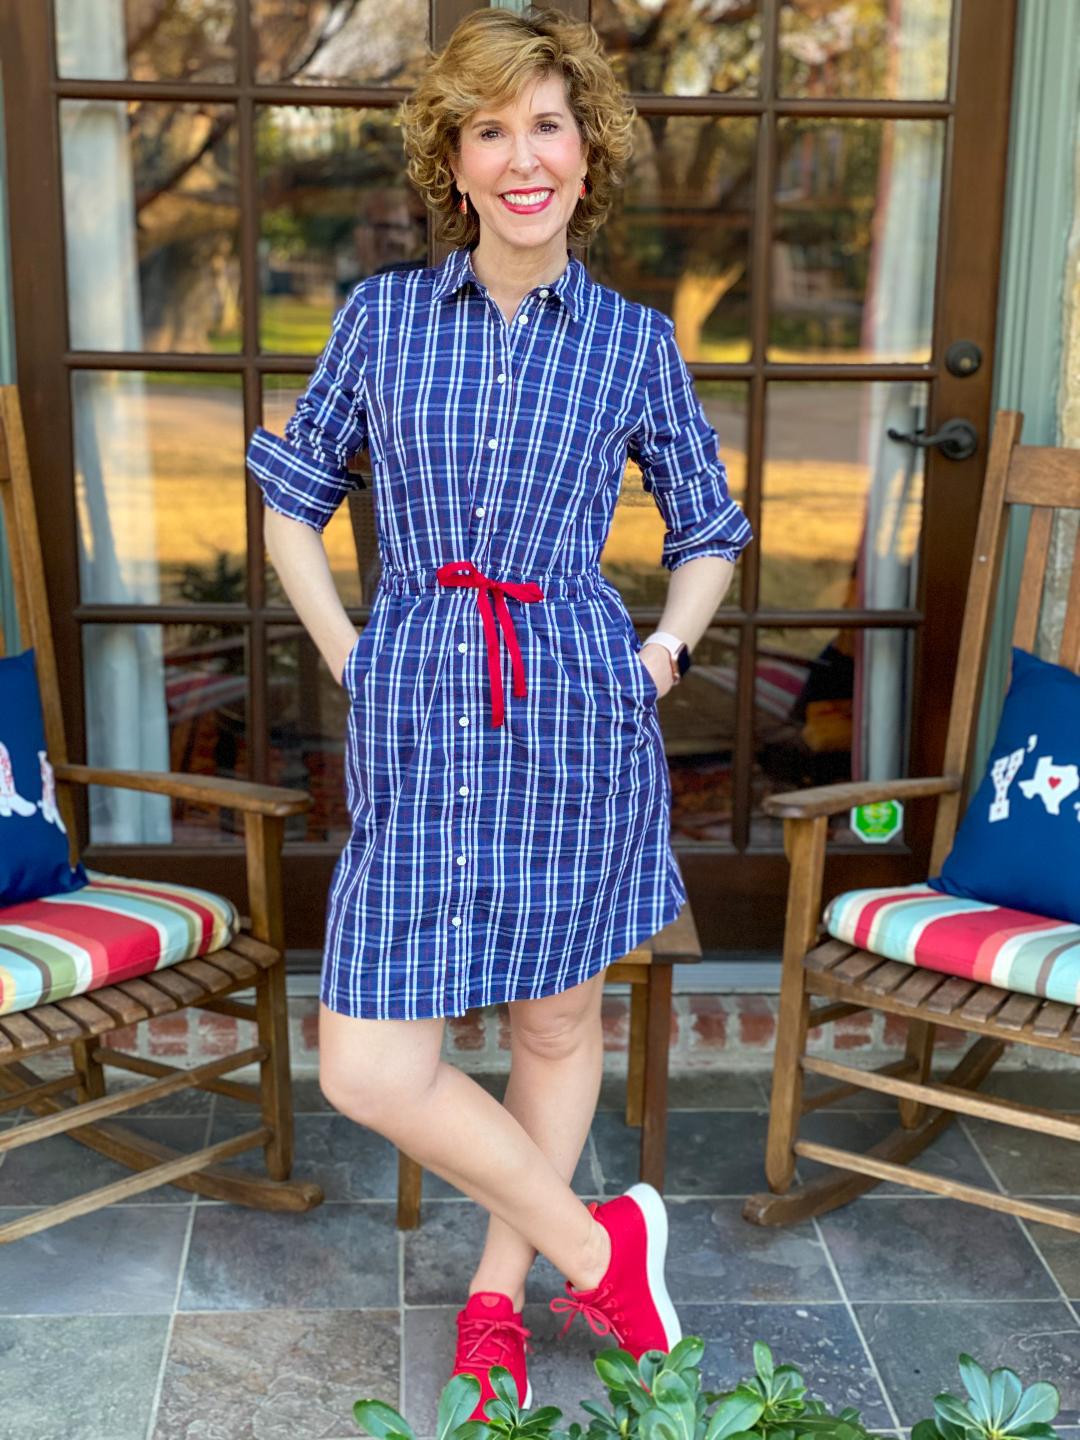 woman in blue dress with red shoes standing on her front porch